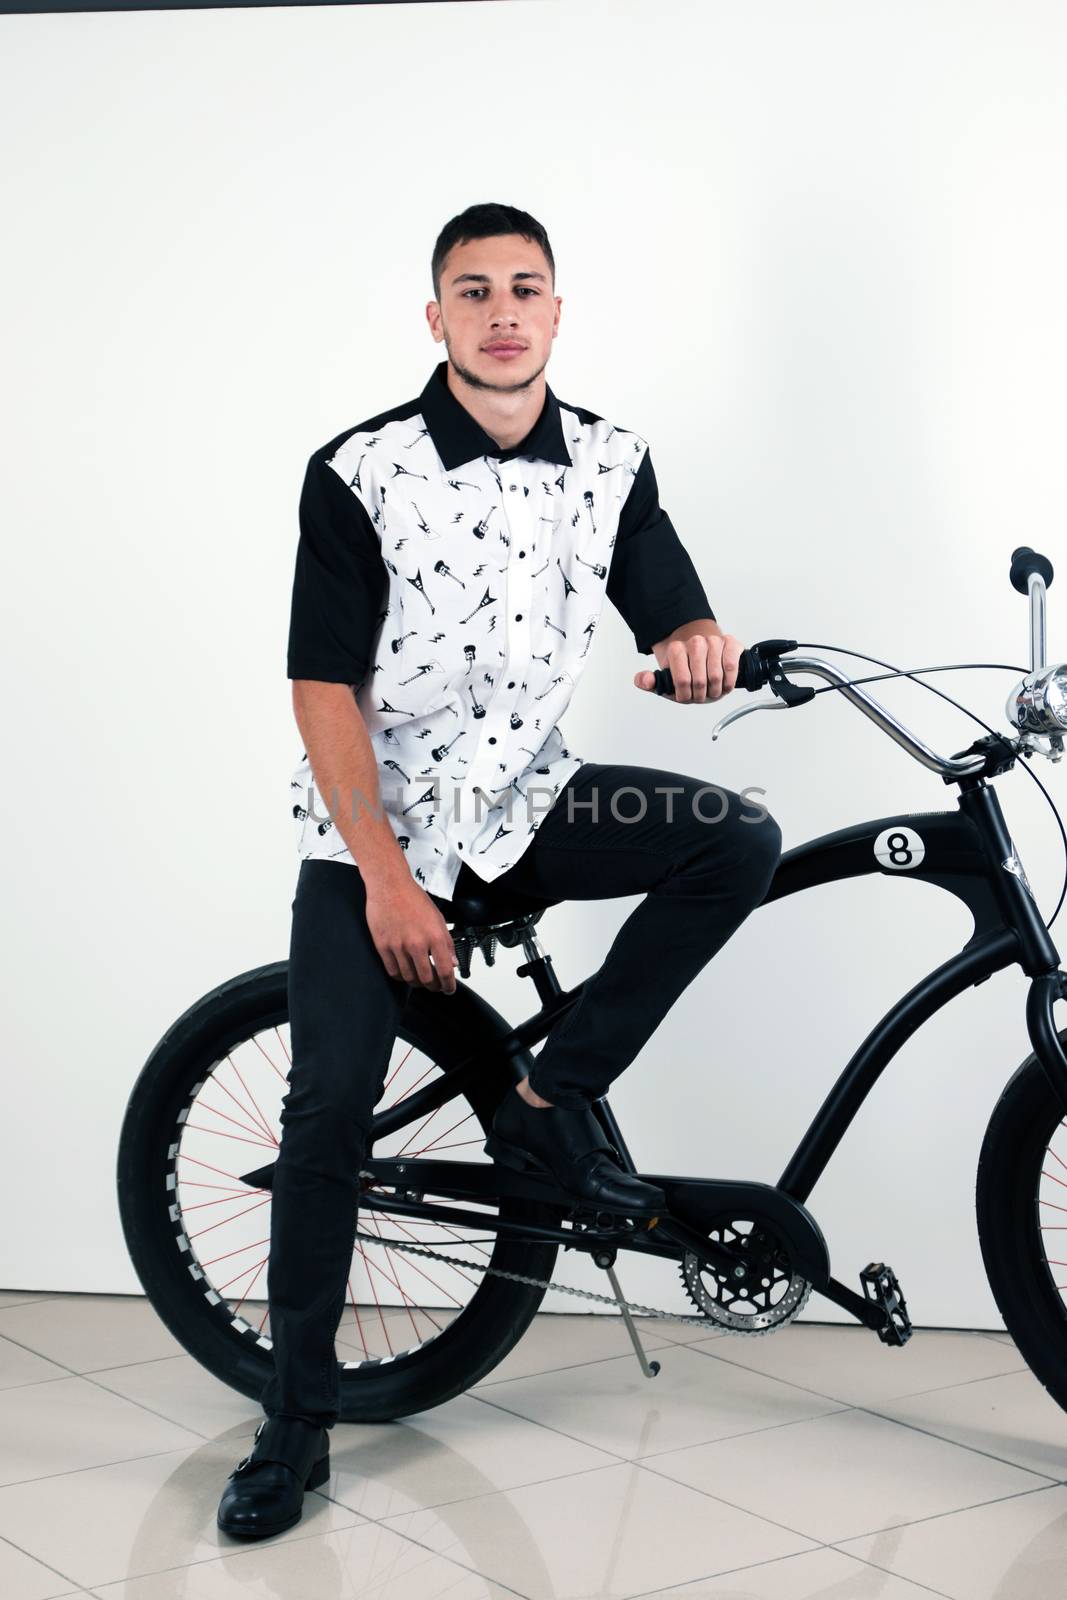 Teenager posing with a vintage style retro clothing and a bike.